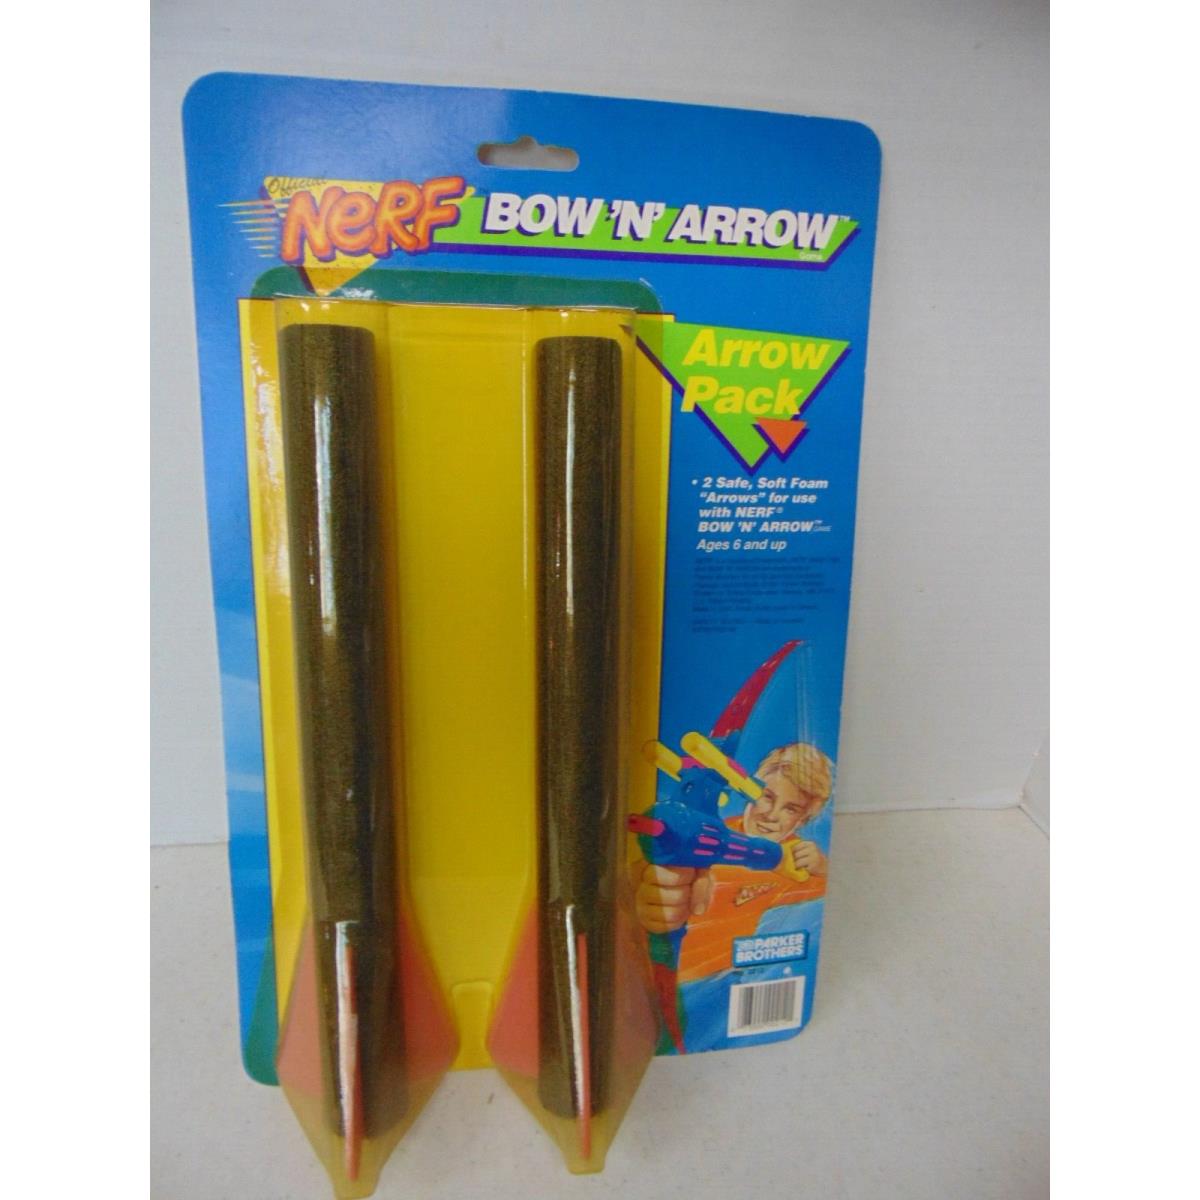 Vintage 1991 Nerf Arrow Pack For Bow N Arrow Parker Brothers